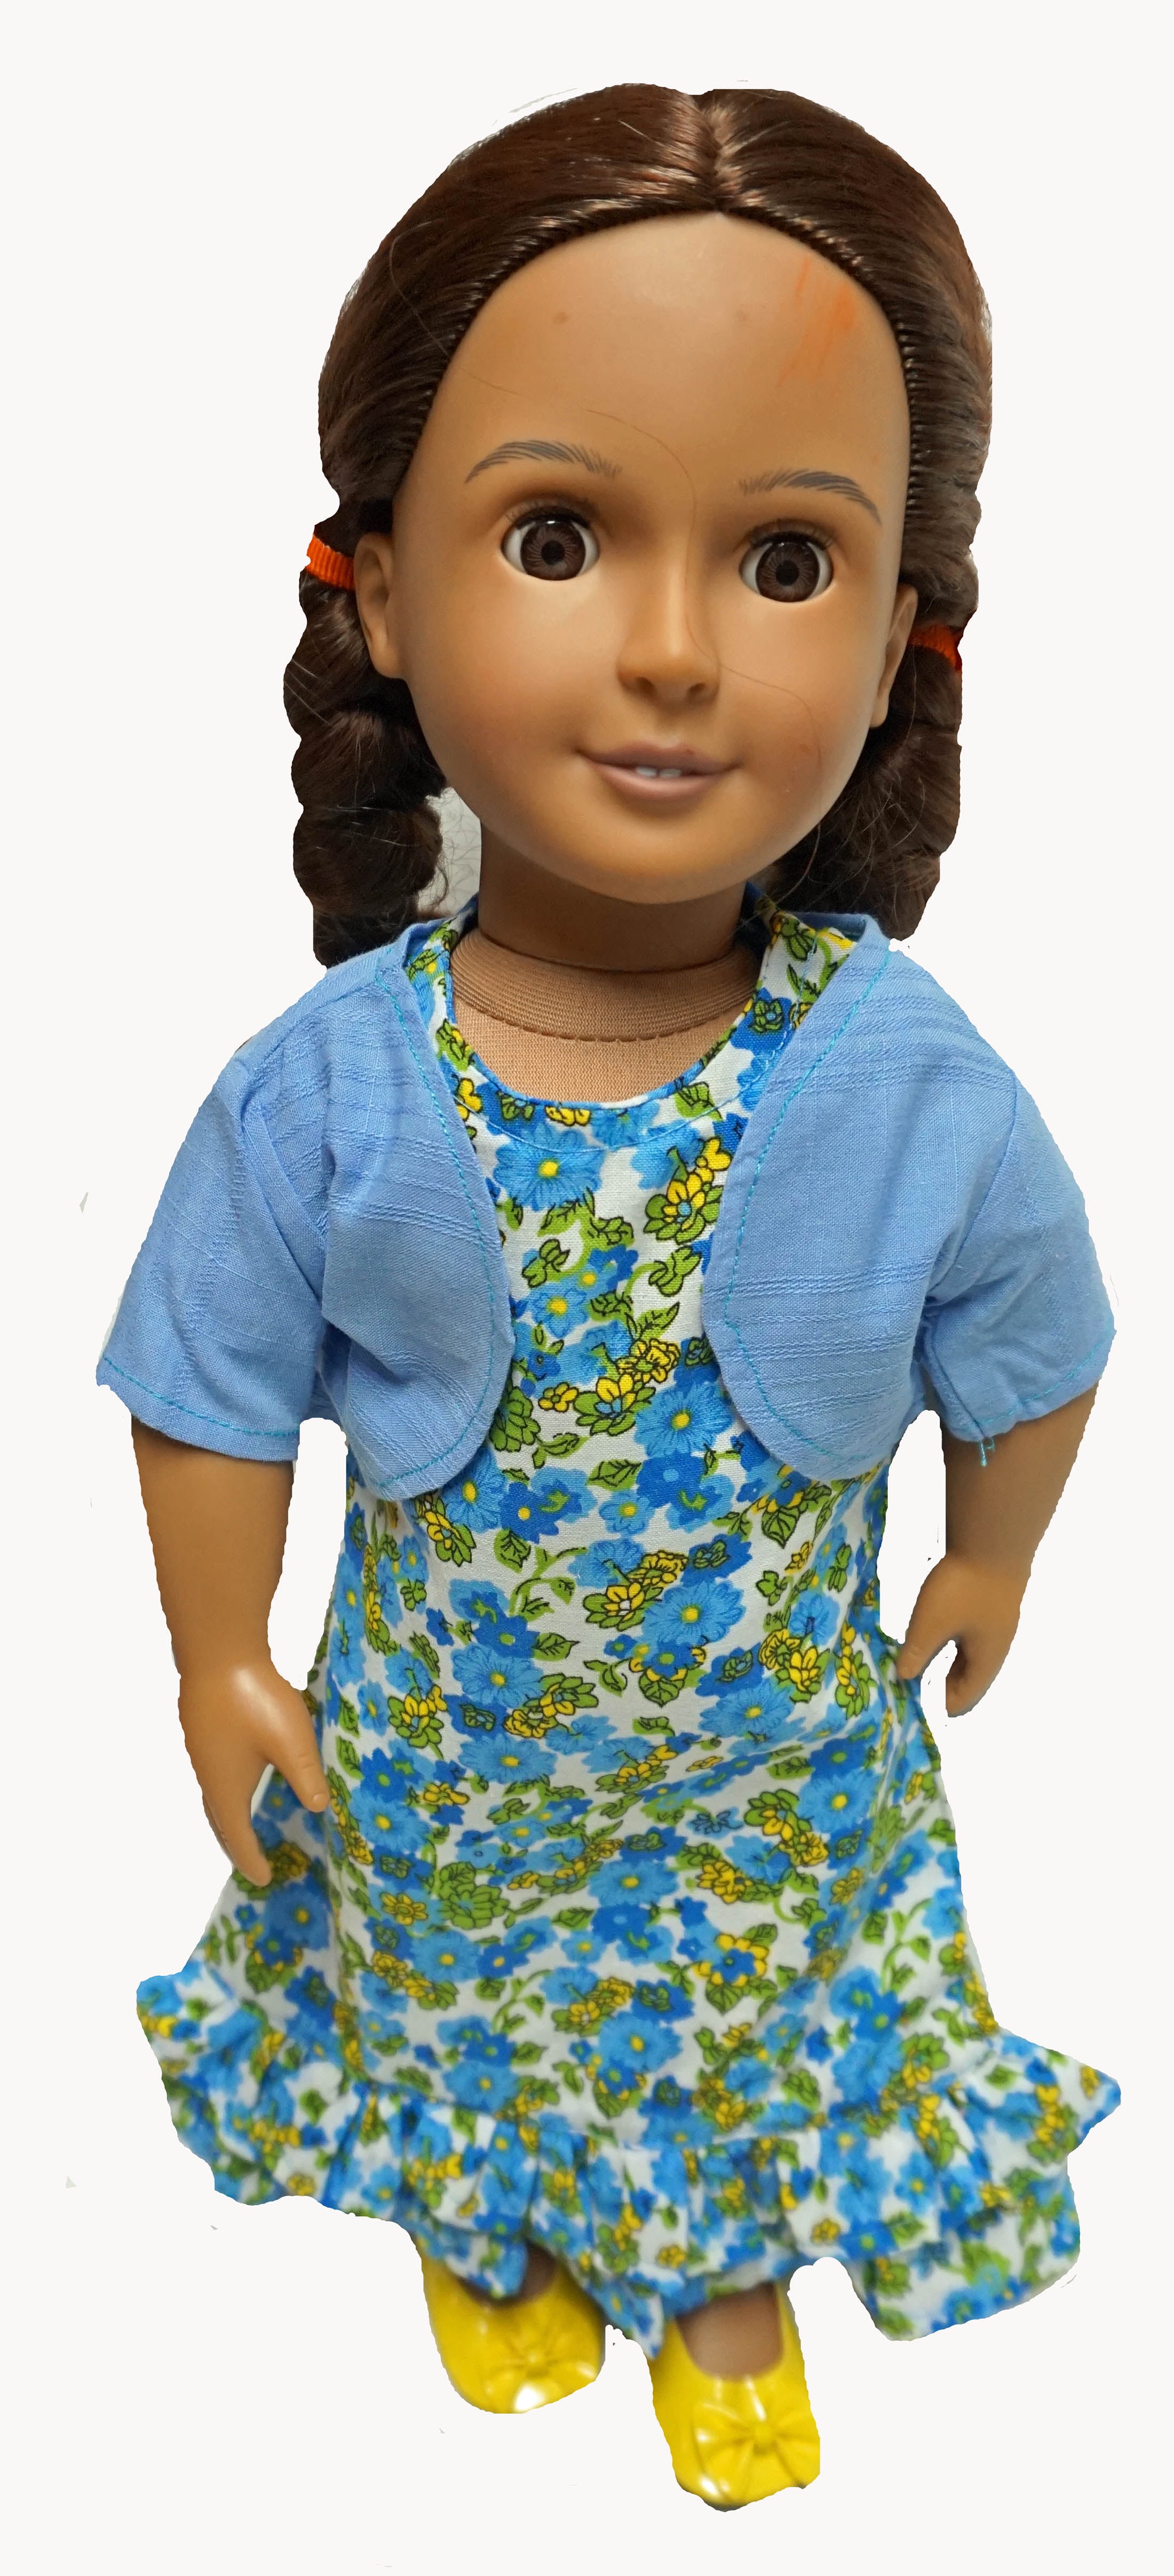 Doll Clothes Superstore Dress With Bolero Jacket Fits 18 ...